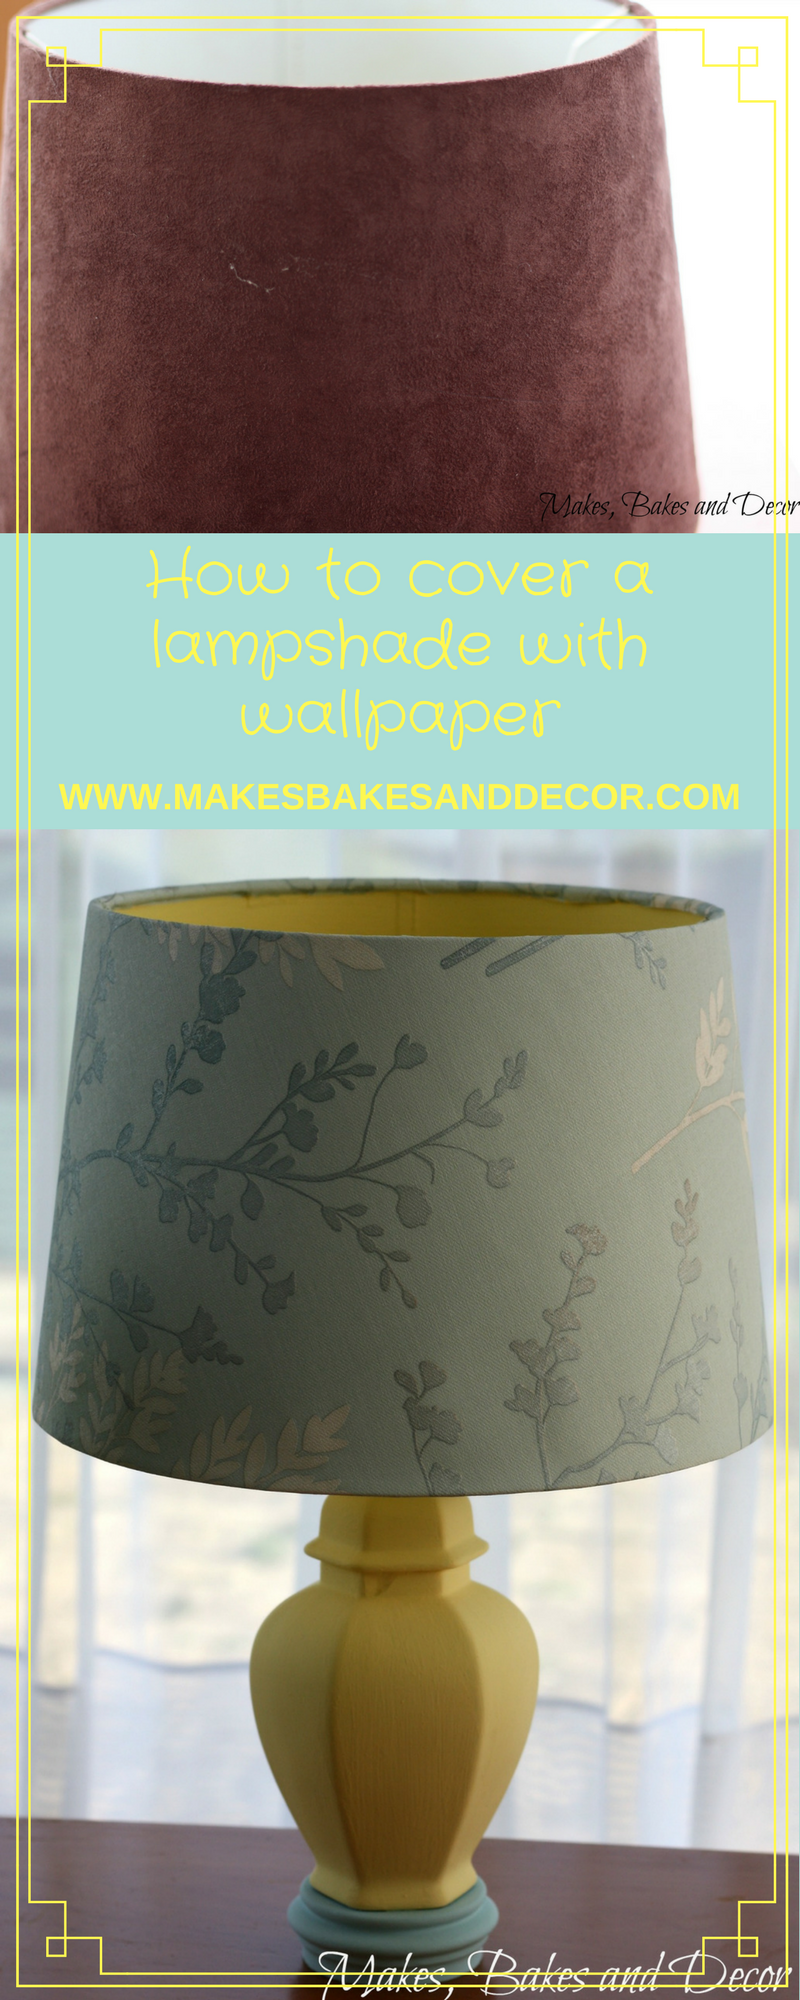 How To Cover A Lampshade With Wallpaper, Can I Line A Lampshade With Wallpaper